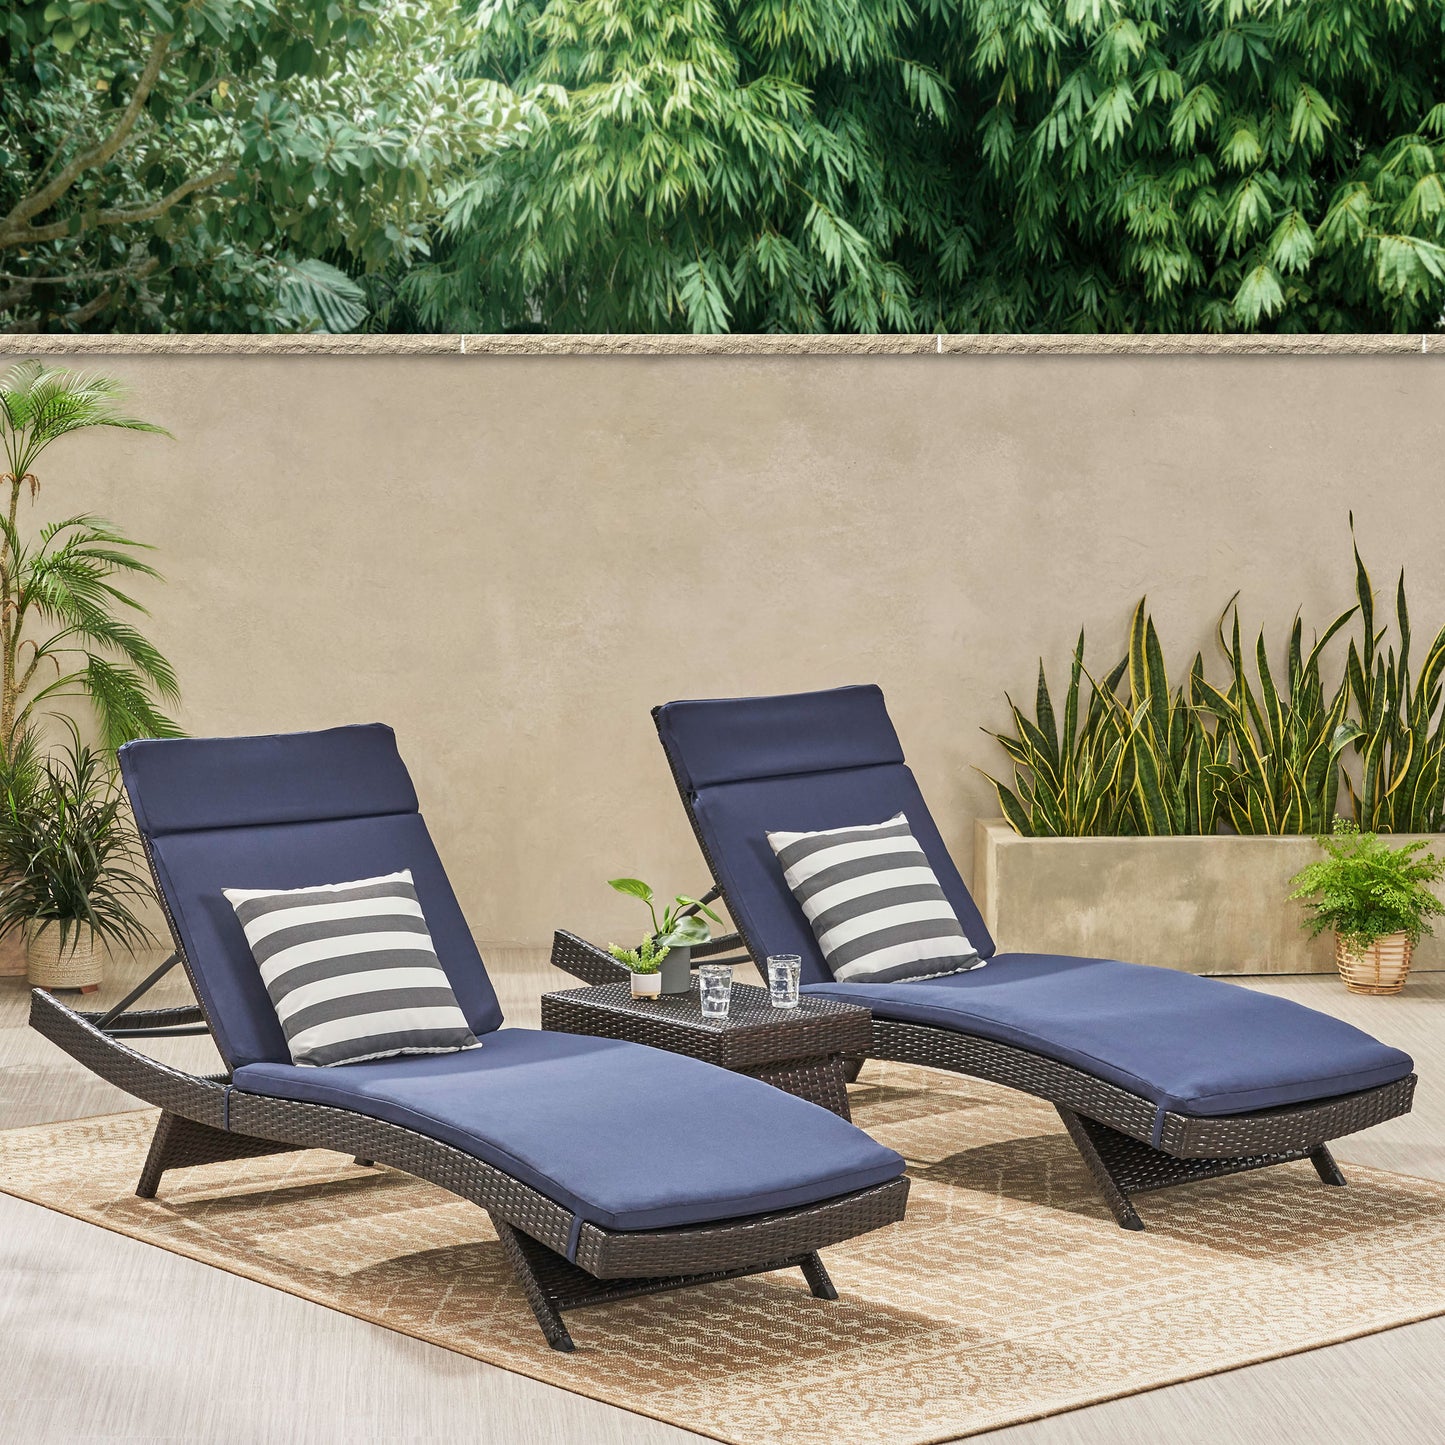 Lakeport Outdoor 3-piece Wicker Adjustable Chaise Lounge Set with Cushions